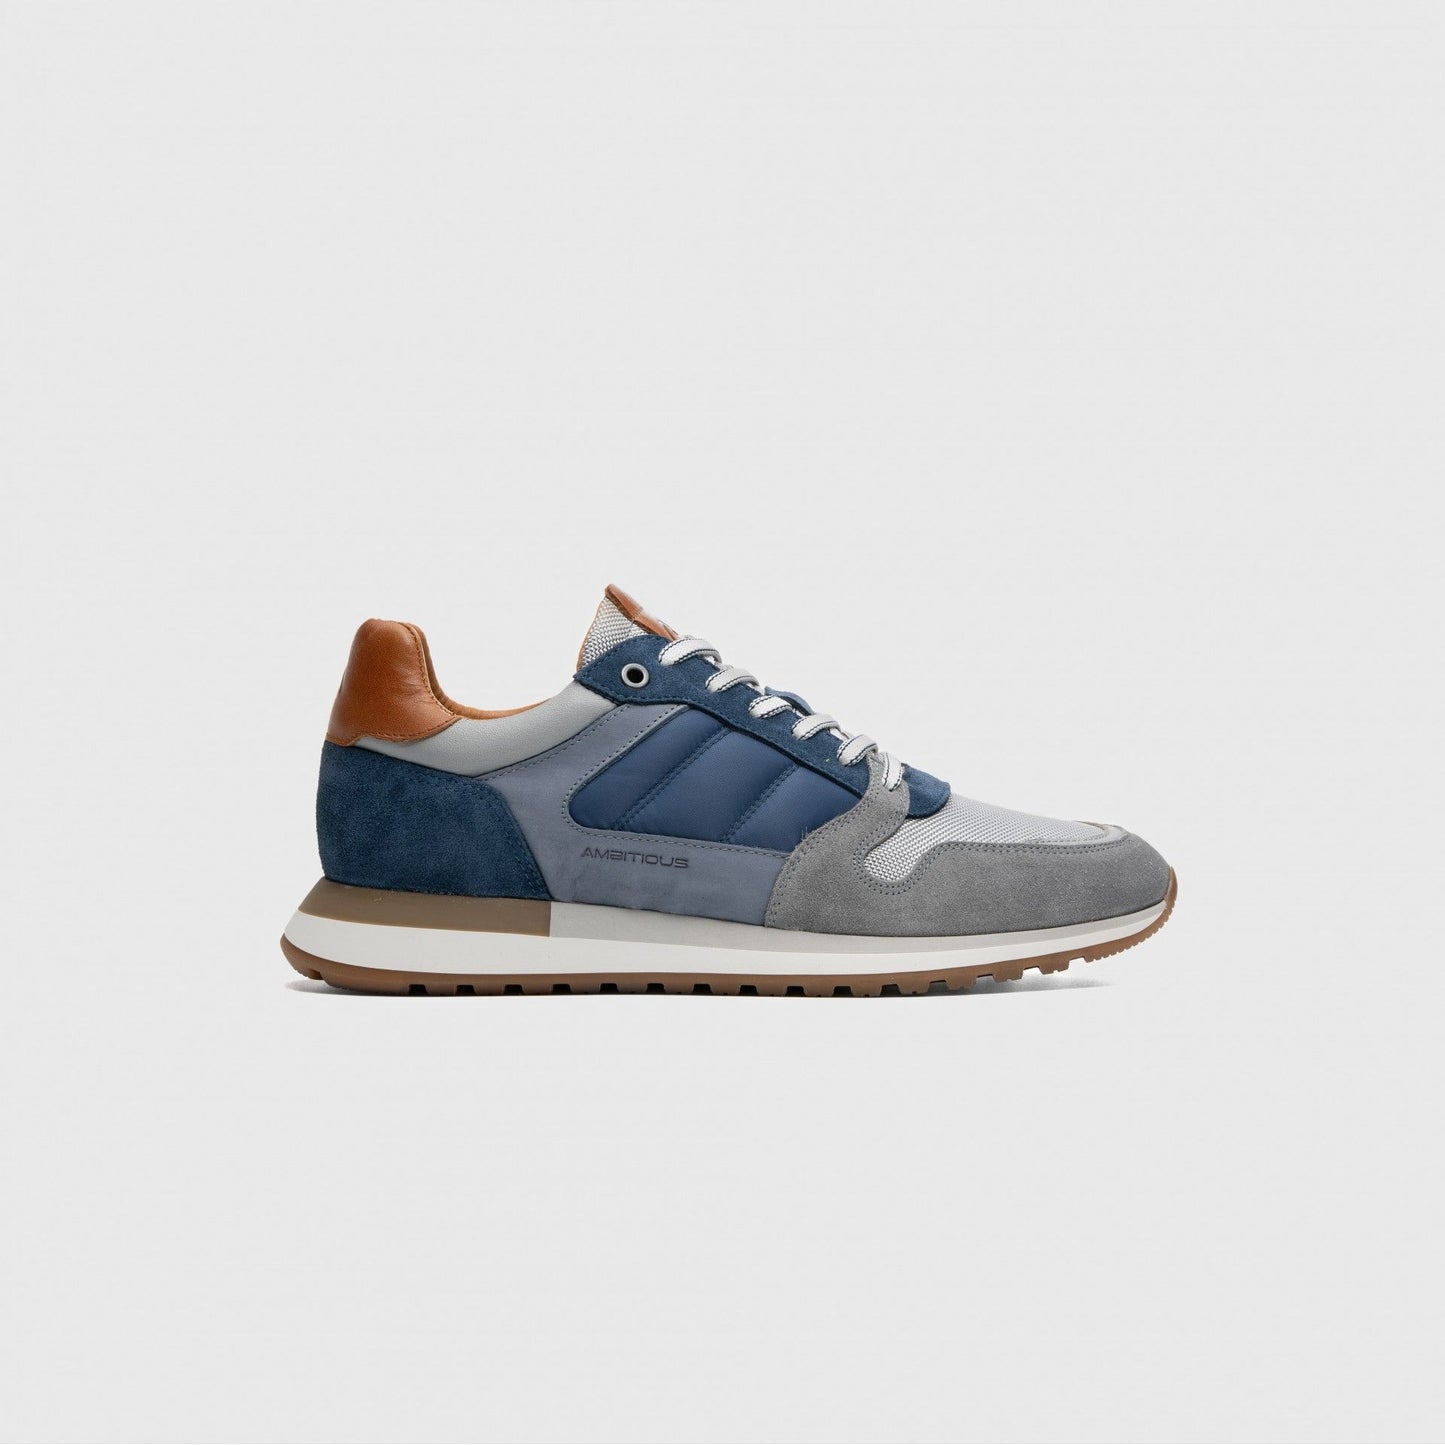 Ambitious 12554A 5947 Navy Combi Trainers